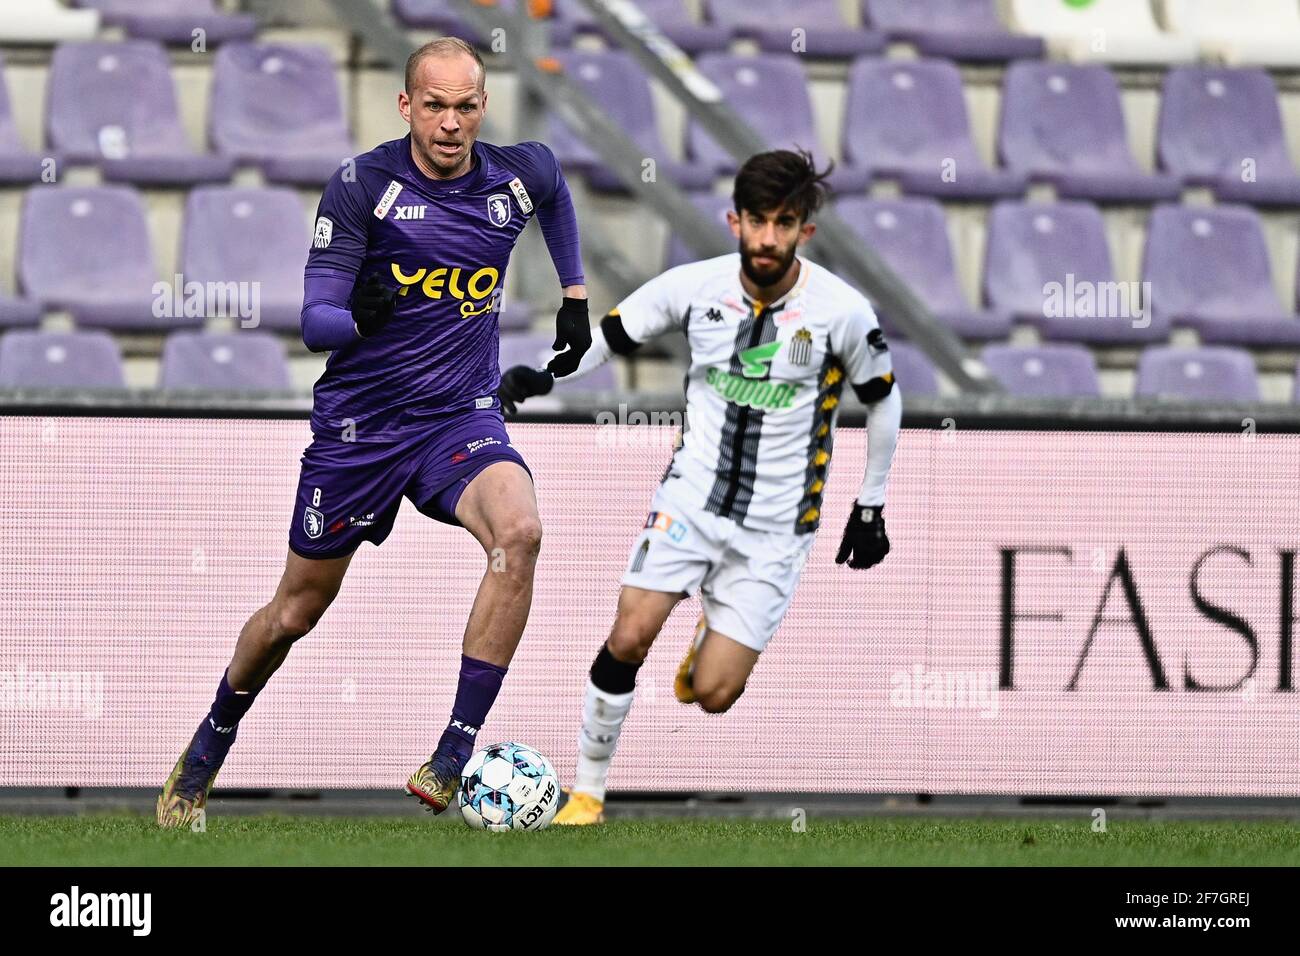 Beerschot's Raphael Holzhauser pictured in action during a postponed soccer match between Beerschot VA and Sporting Charleroi, Wednesday 07 April 2021 Stock Photo